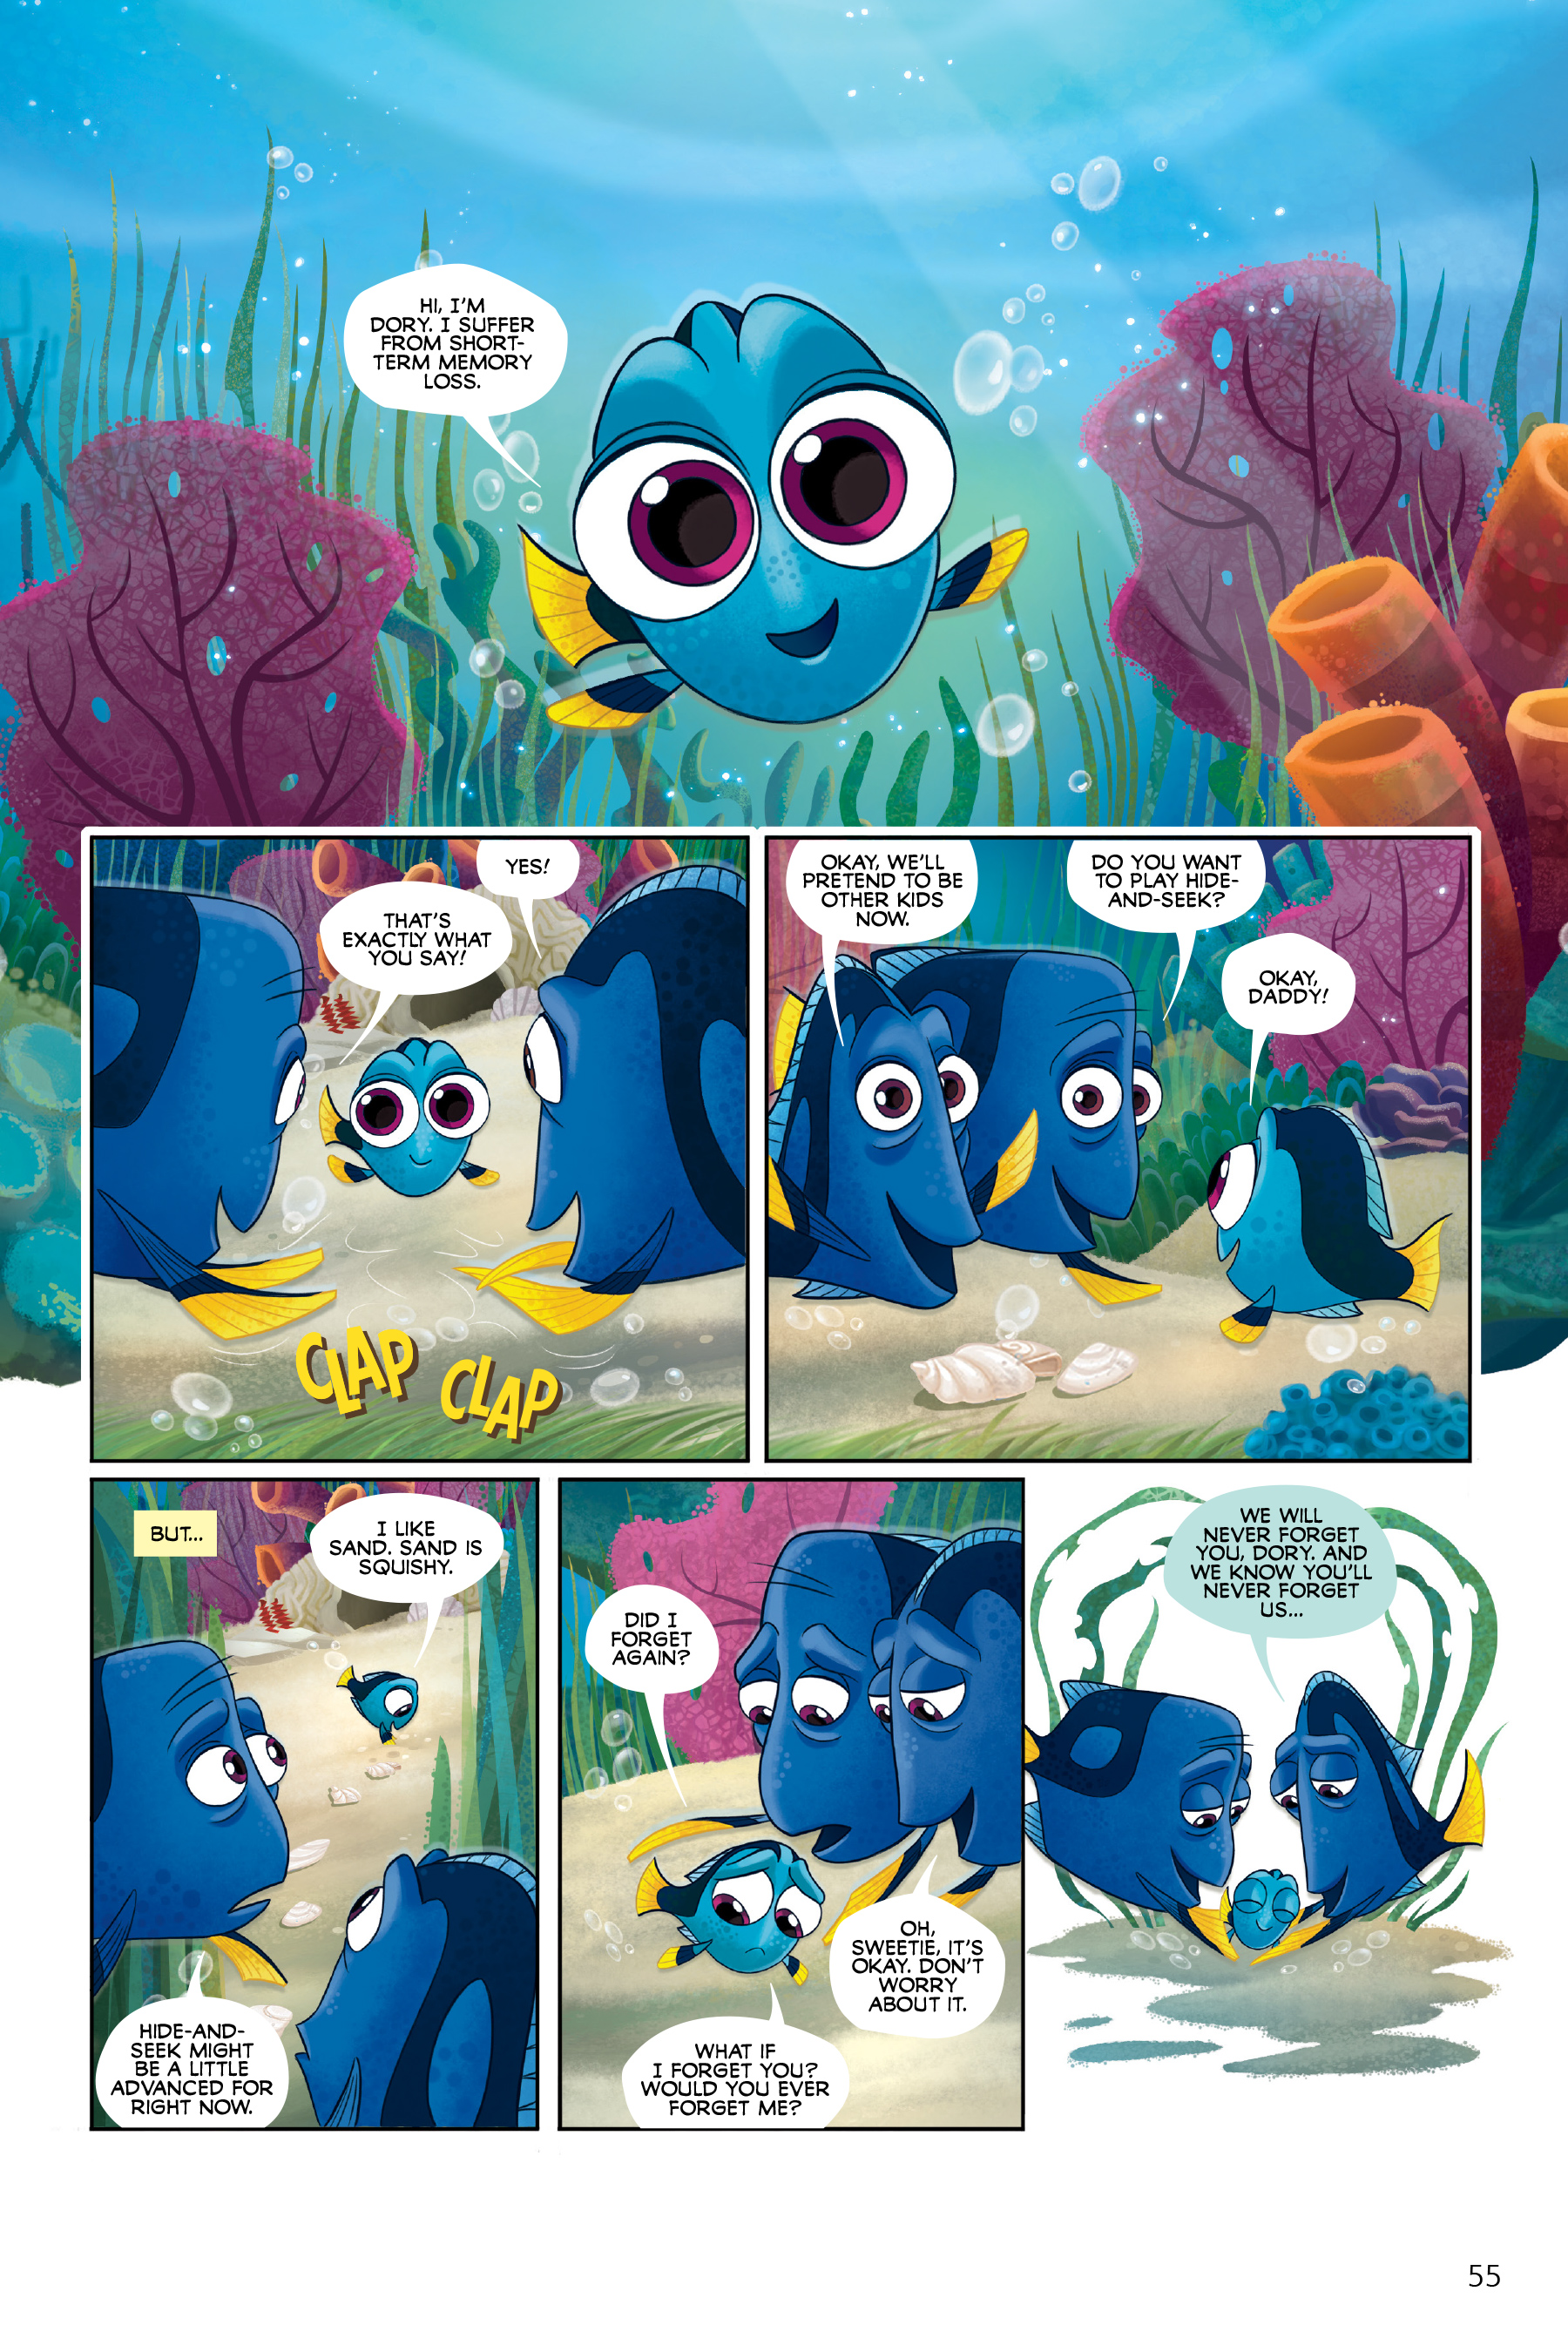 Disney Nemo Porn - Disney Pixar Finding Nemo And Finding Dory The Story Of The Movies In  Comics Tpb | Read Disney Pixar Finding Nemo And Finding Dory The Story Of  The Movies In Comics Tpb